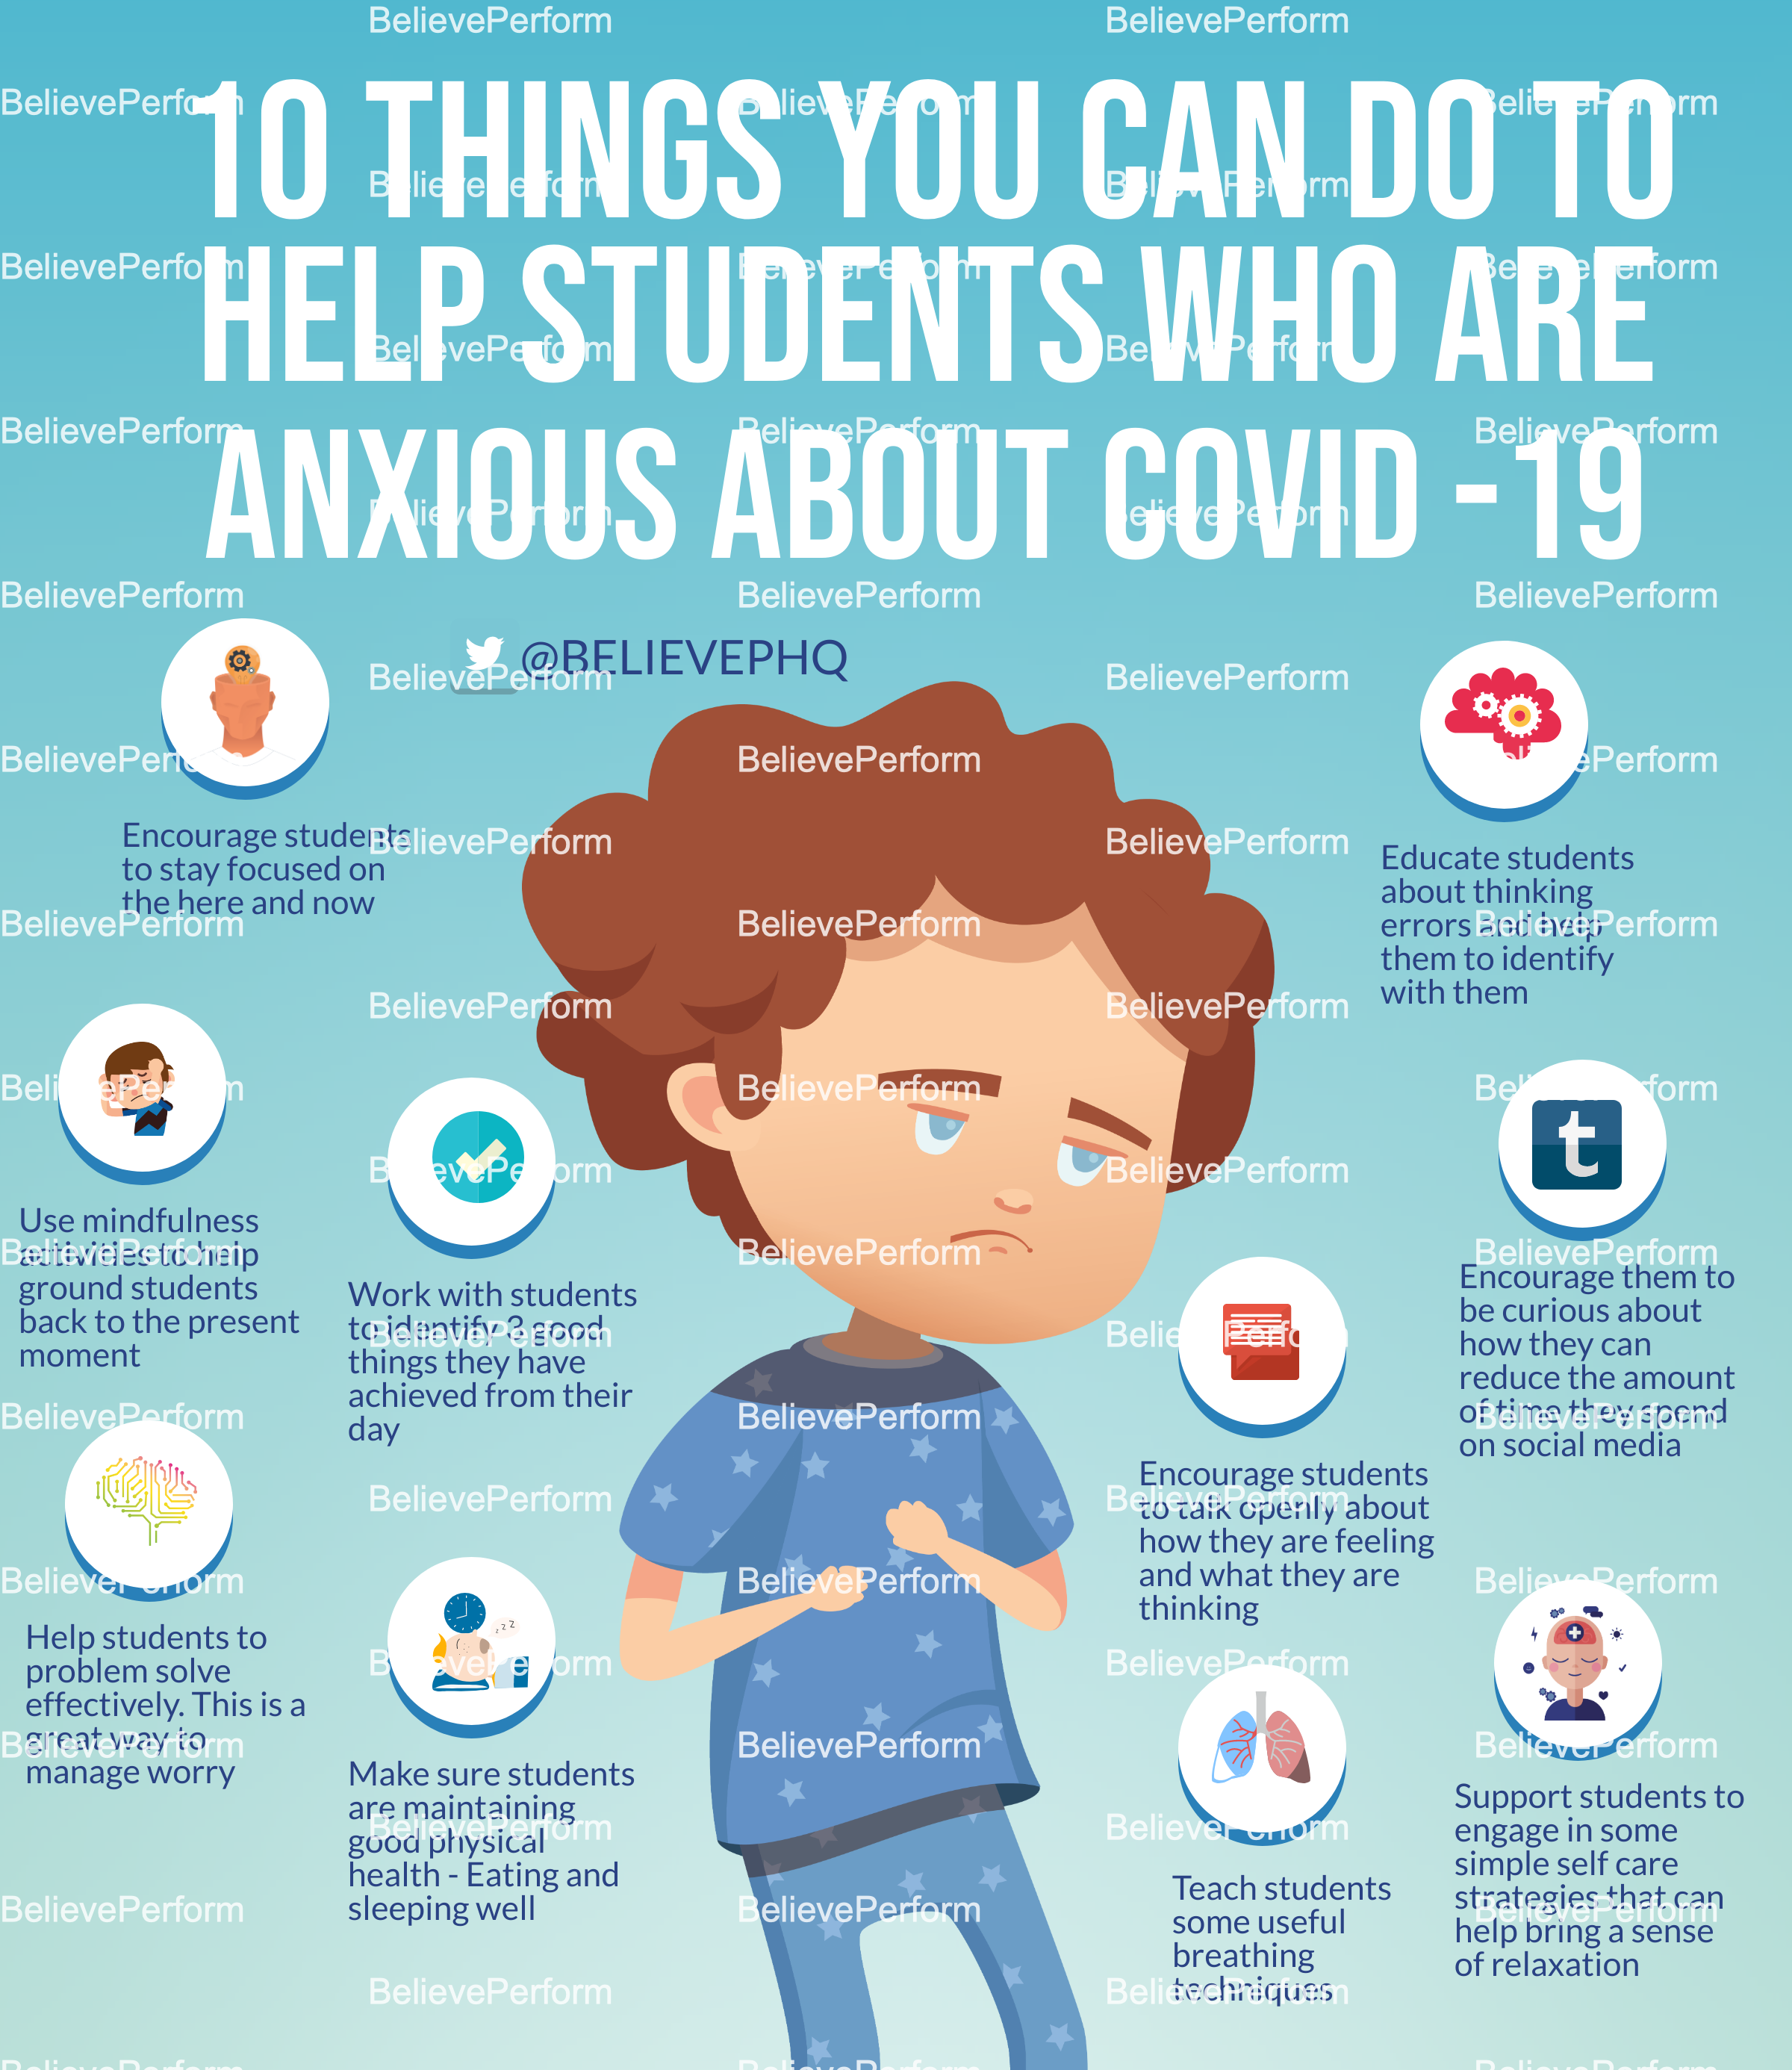 10 things you can do to help students who are anxious